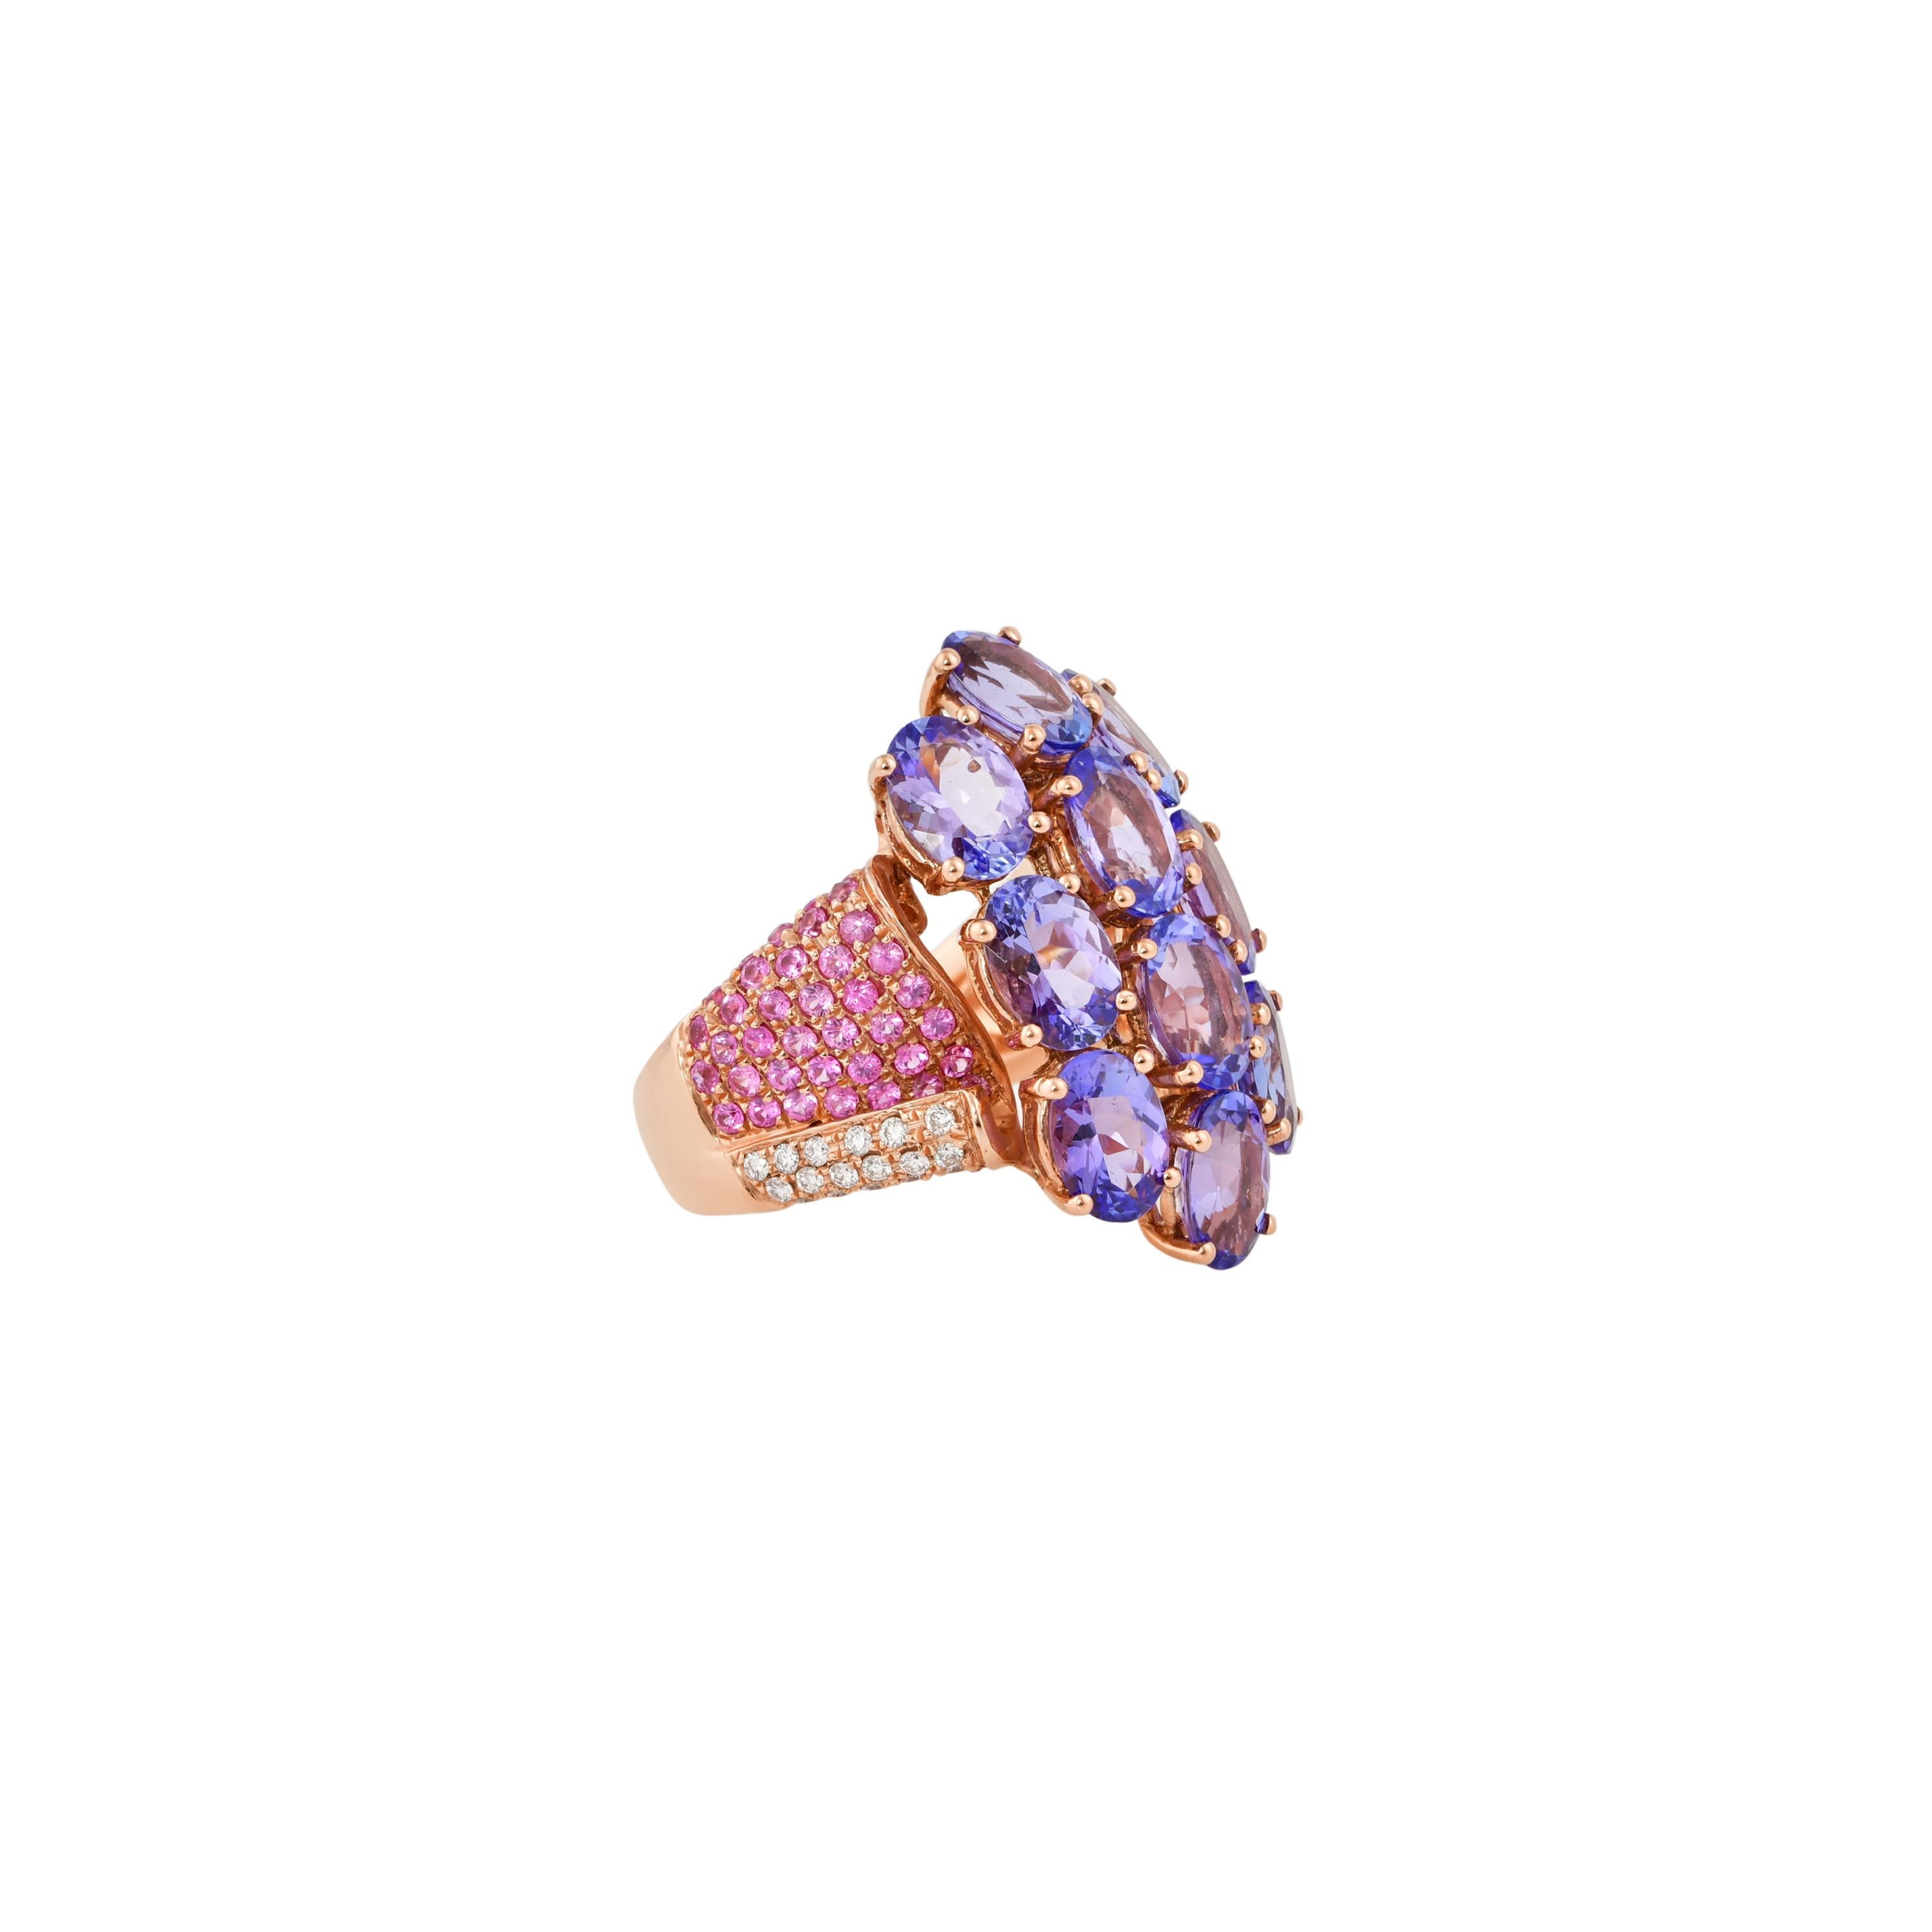 Glamorous Gemstones - Sunita Nahata started off her career as a gemstone trader, and this particular collection reflects her love for multi-colored semi-precious gemstones. This ring presents a cluster of the most vibrant Tanzanites sourced from